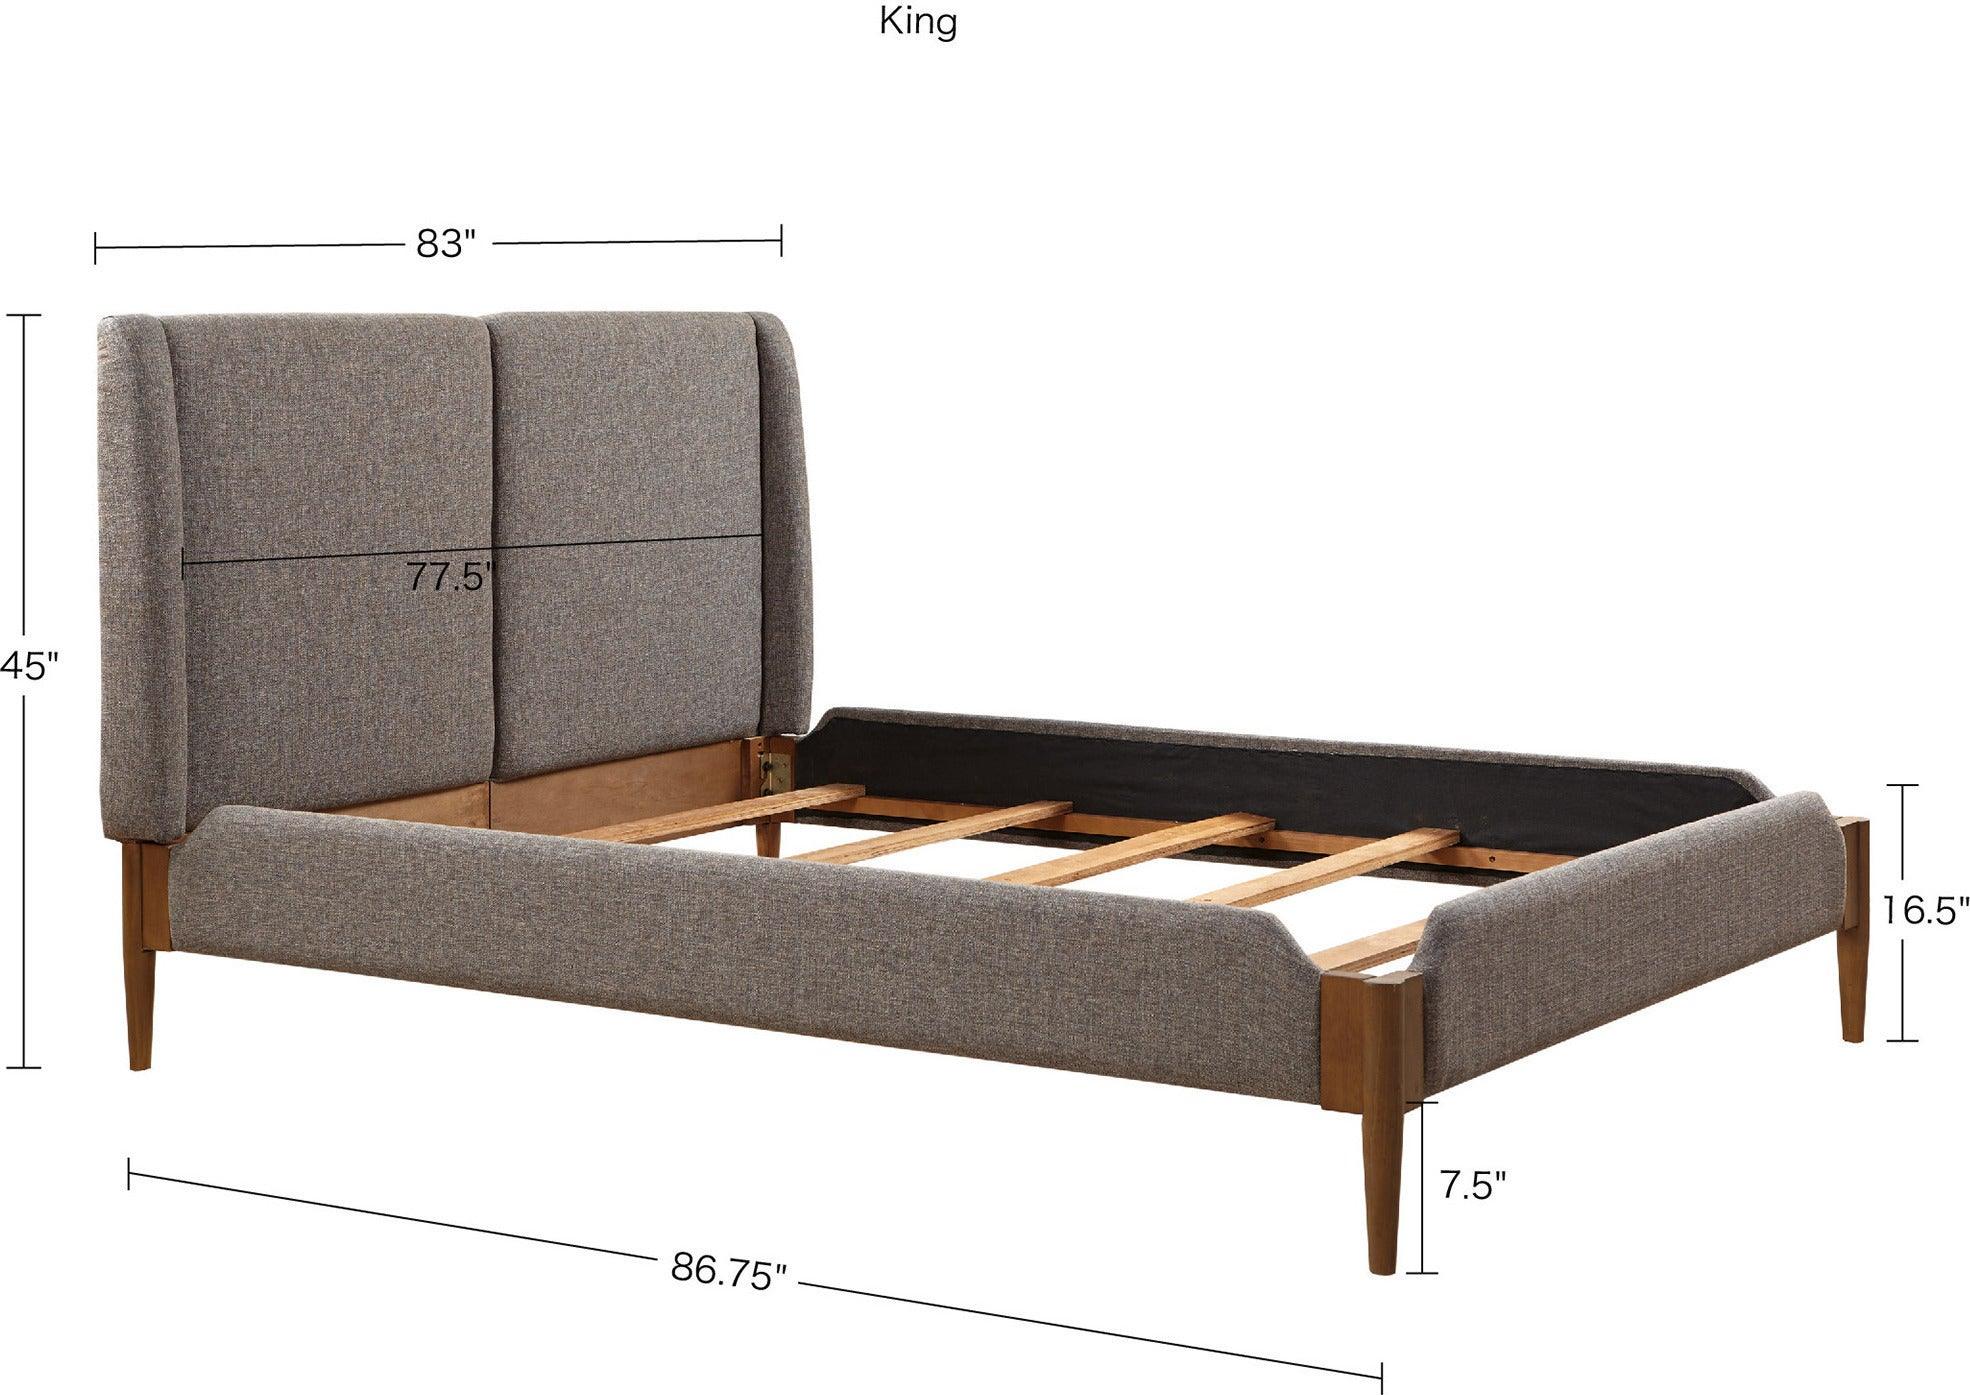 Olliix.com Beds - Mallory King Bed Brown